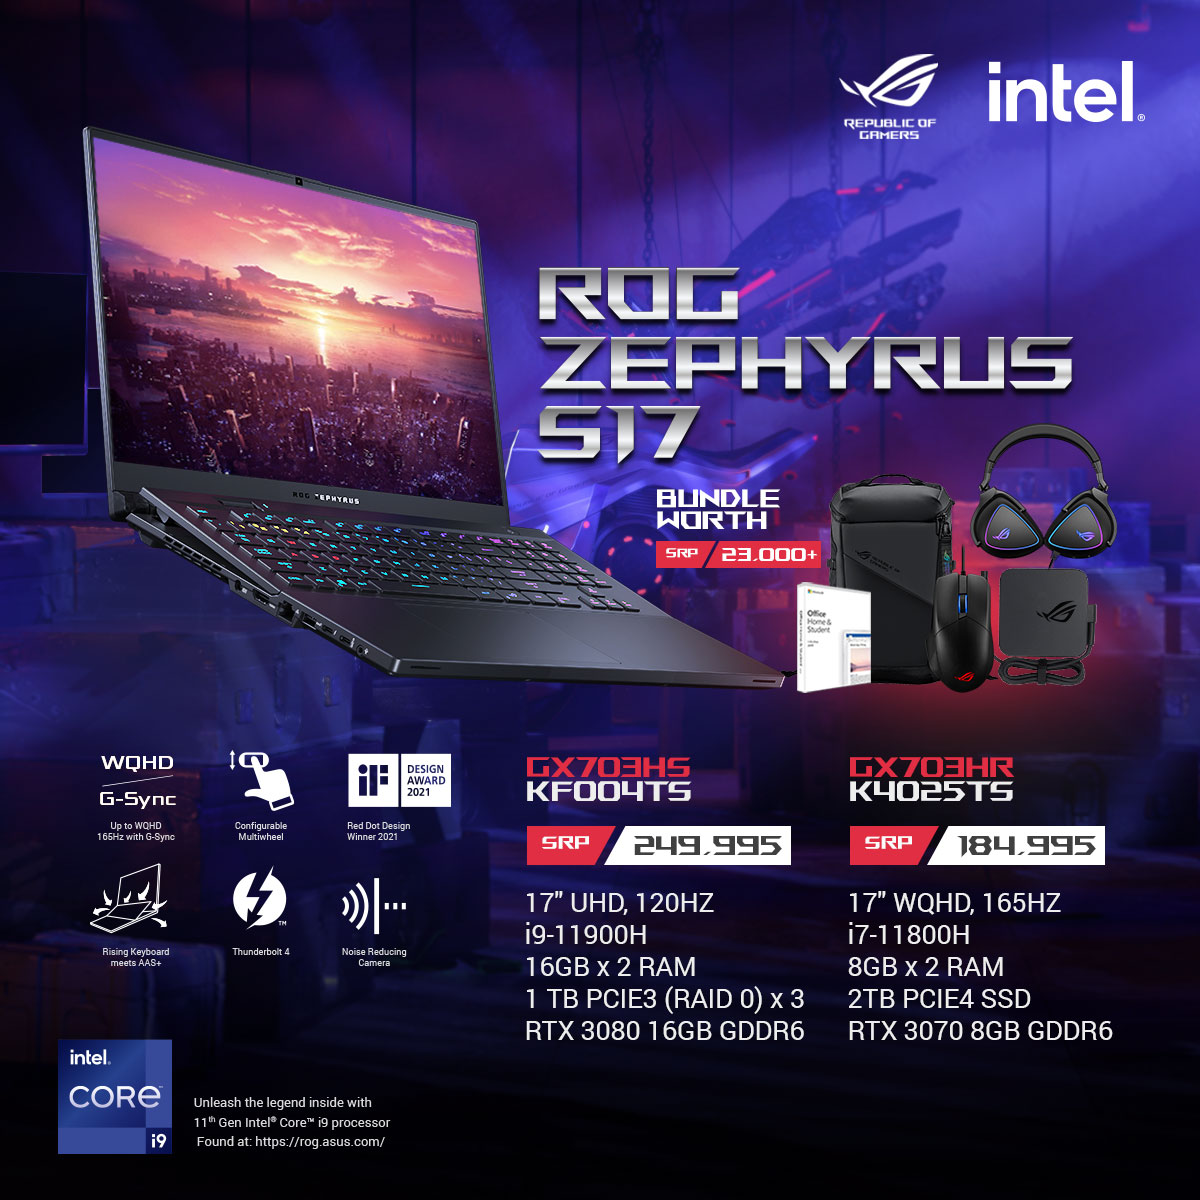 ROG Zephyrus S17 Key Features and Price